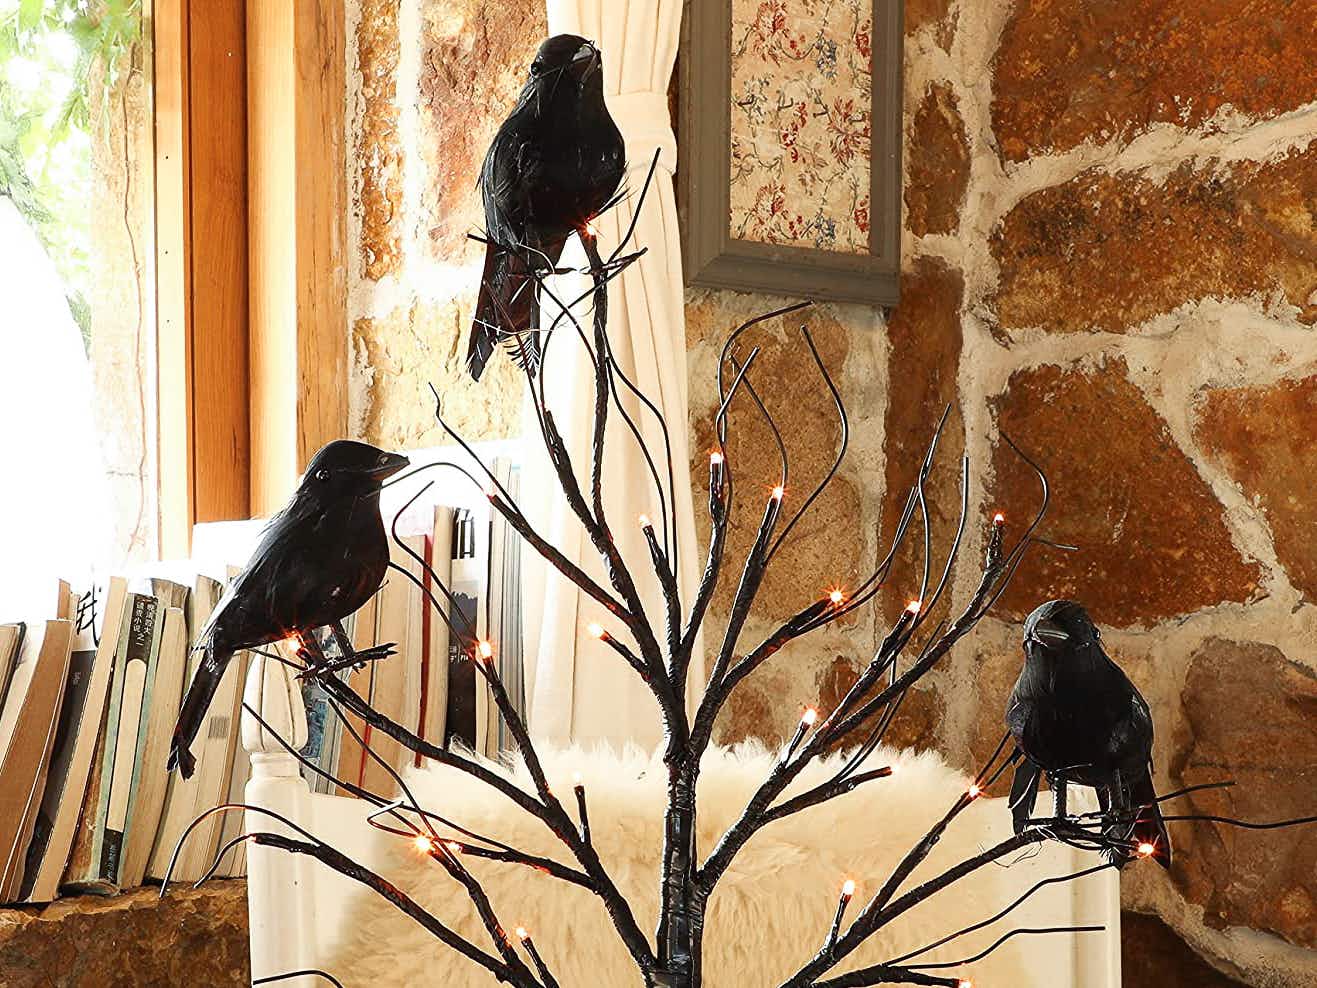 Faux crows perched on a tree decoration with LED lights in the branches.